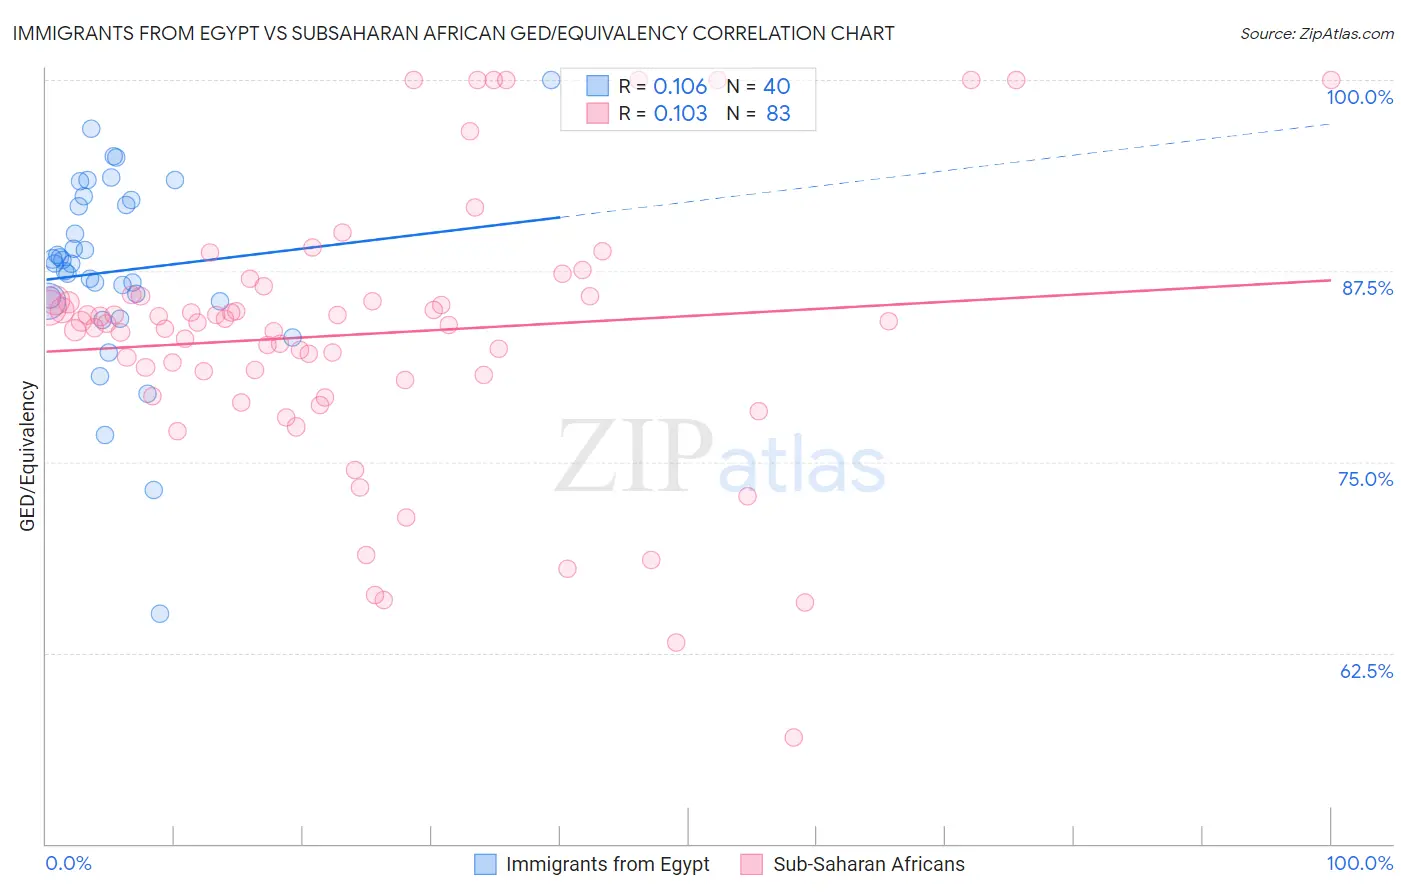 Immigrants from Egypt vs Subsaharan African GED/Equivalency